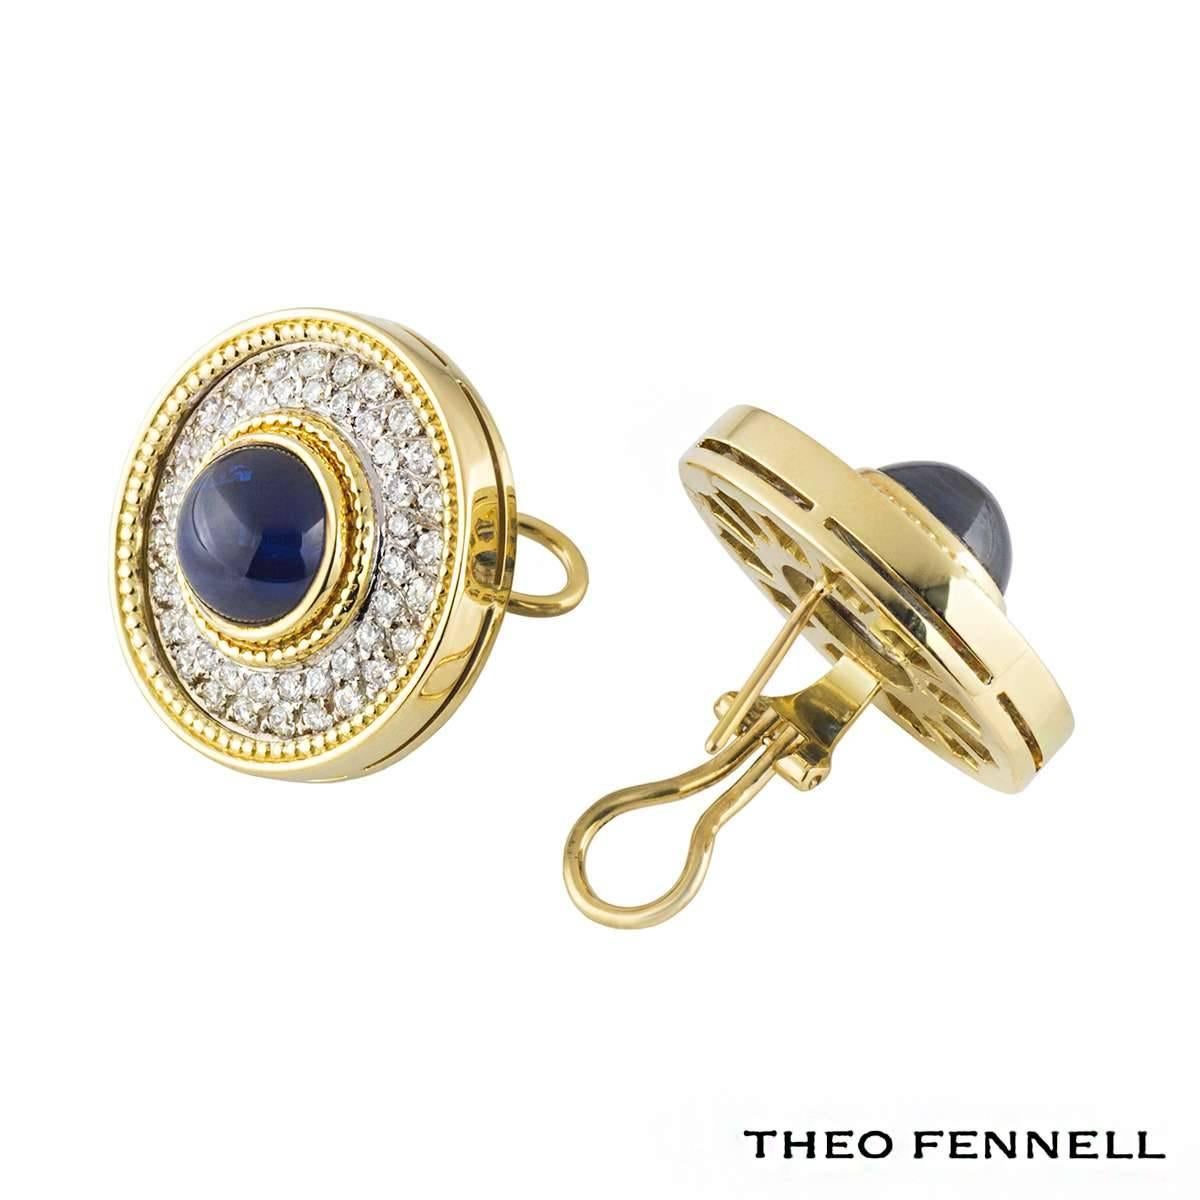 A pair of 18k yellow gold earrings by Theo Fennell. Each circular earring features a 1cm cabochon cut deep blue sapphire in a rubover setting complimented by a beaded outer edge. Surrounding the central stone are 48 round brilliant cut diamonds,